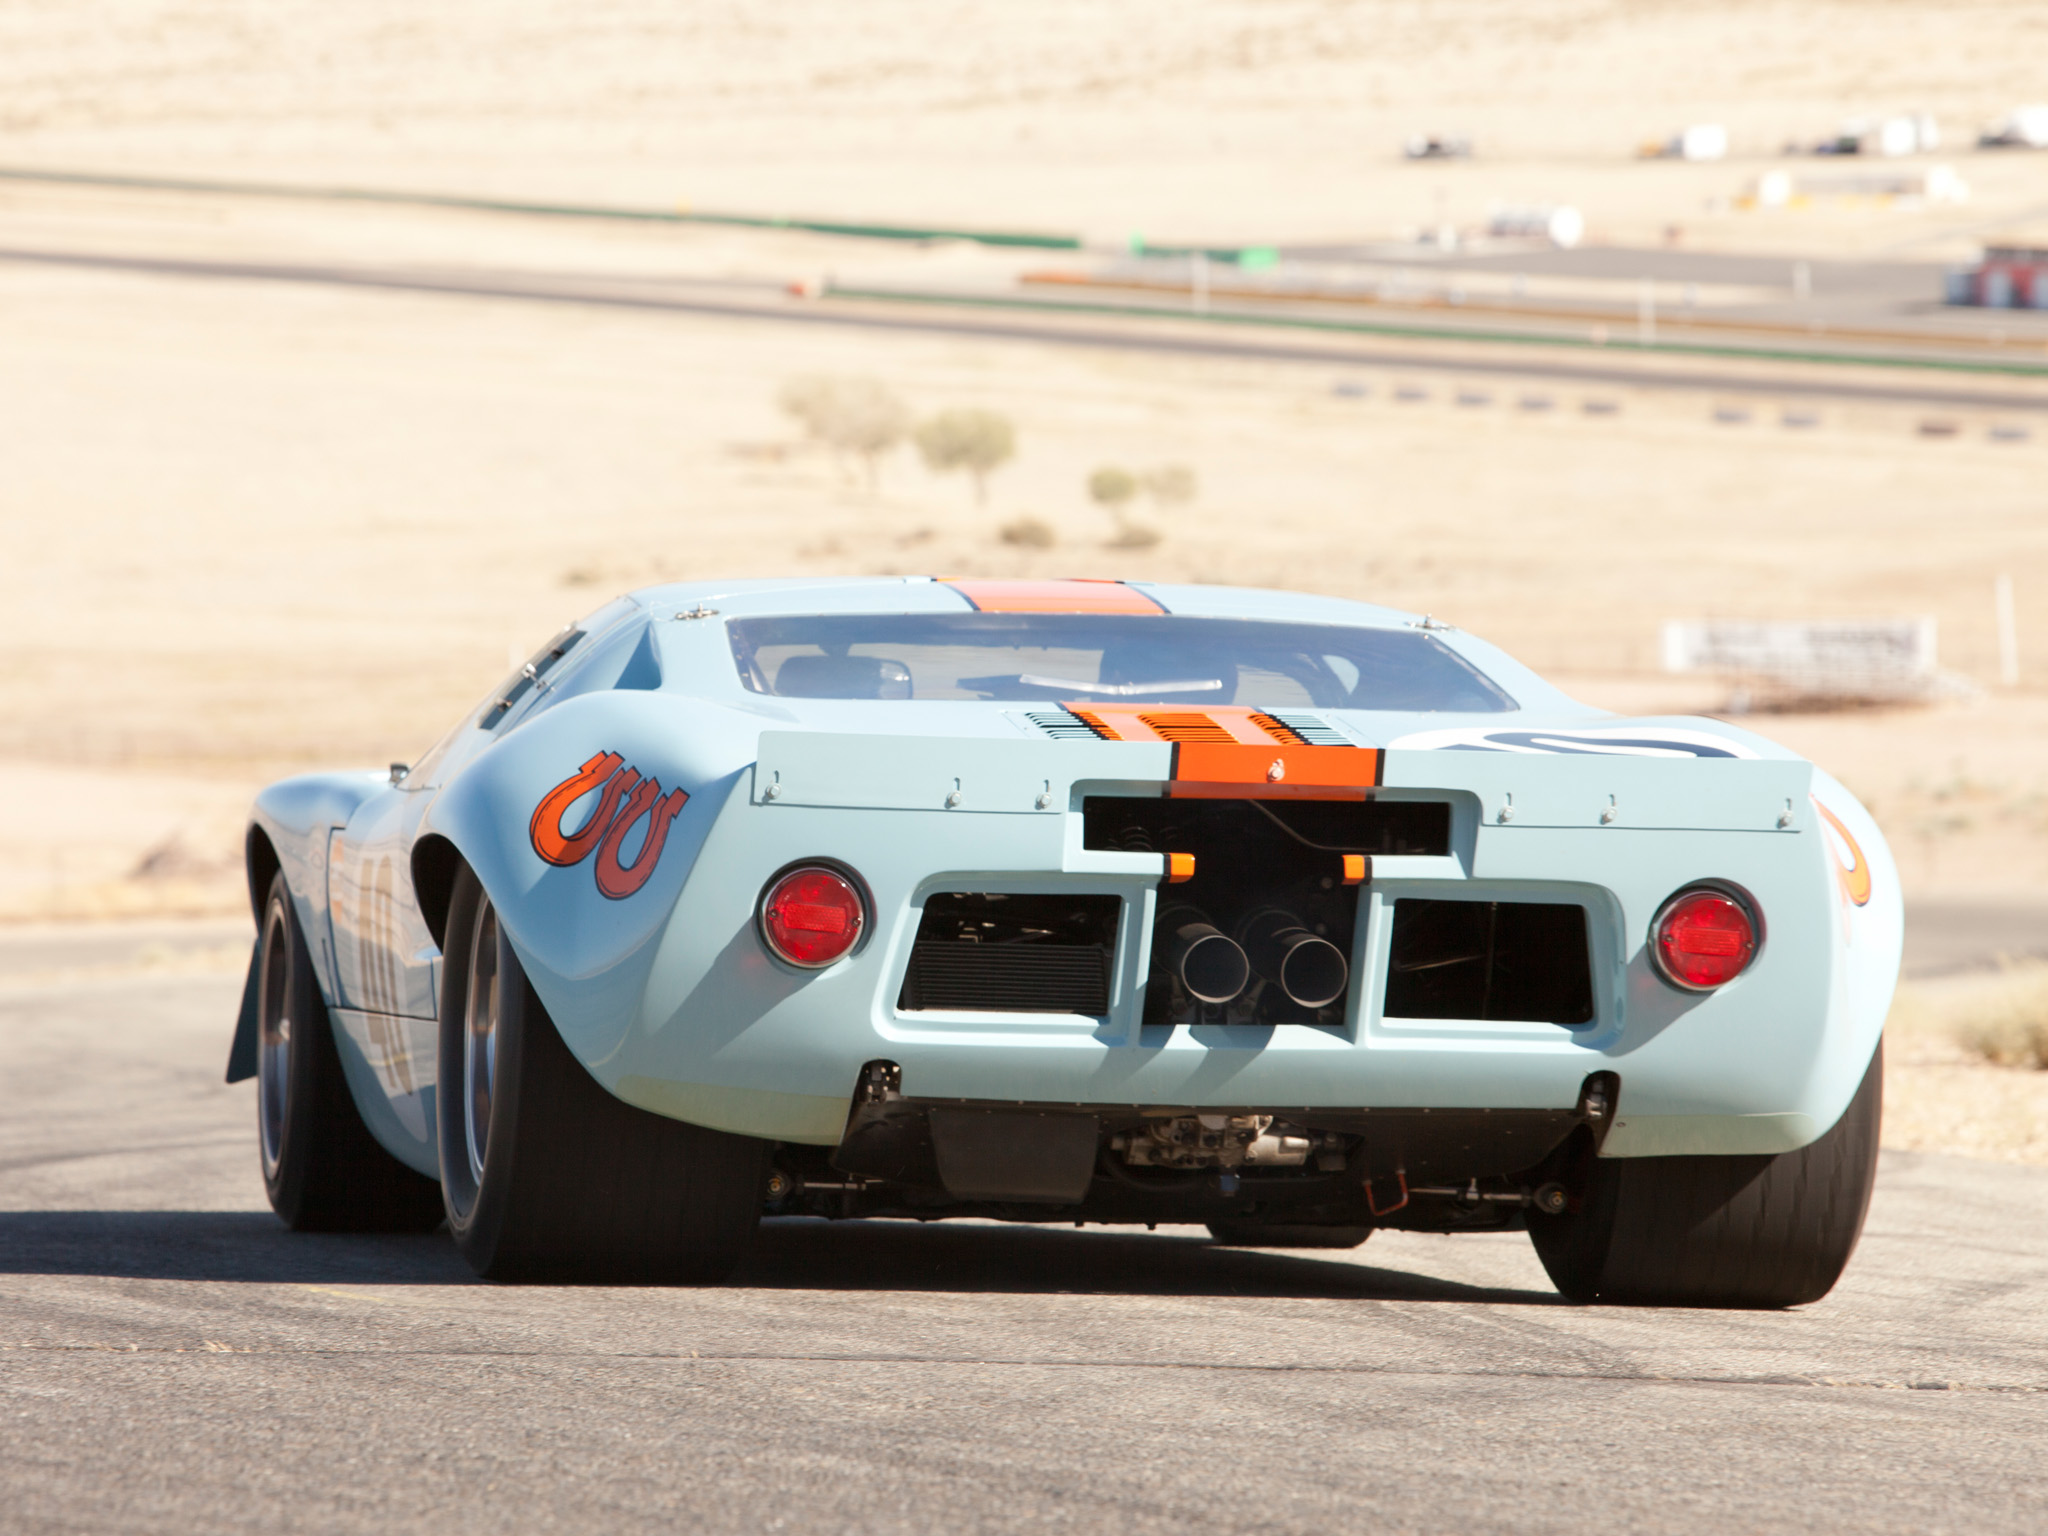 1968, Ford, Gt40, Gulf oil, Le mans, Race, Racing, Supercar, Classic, Gw Wallpaper